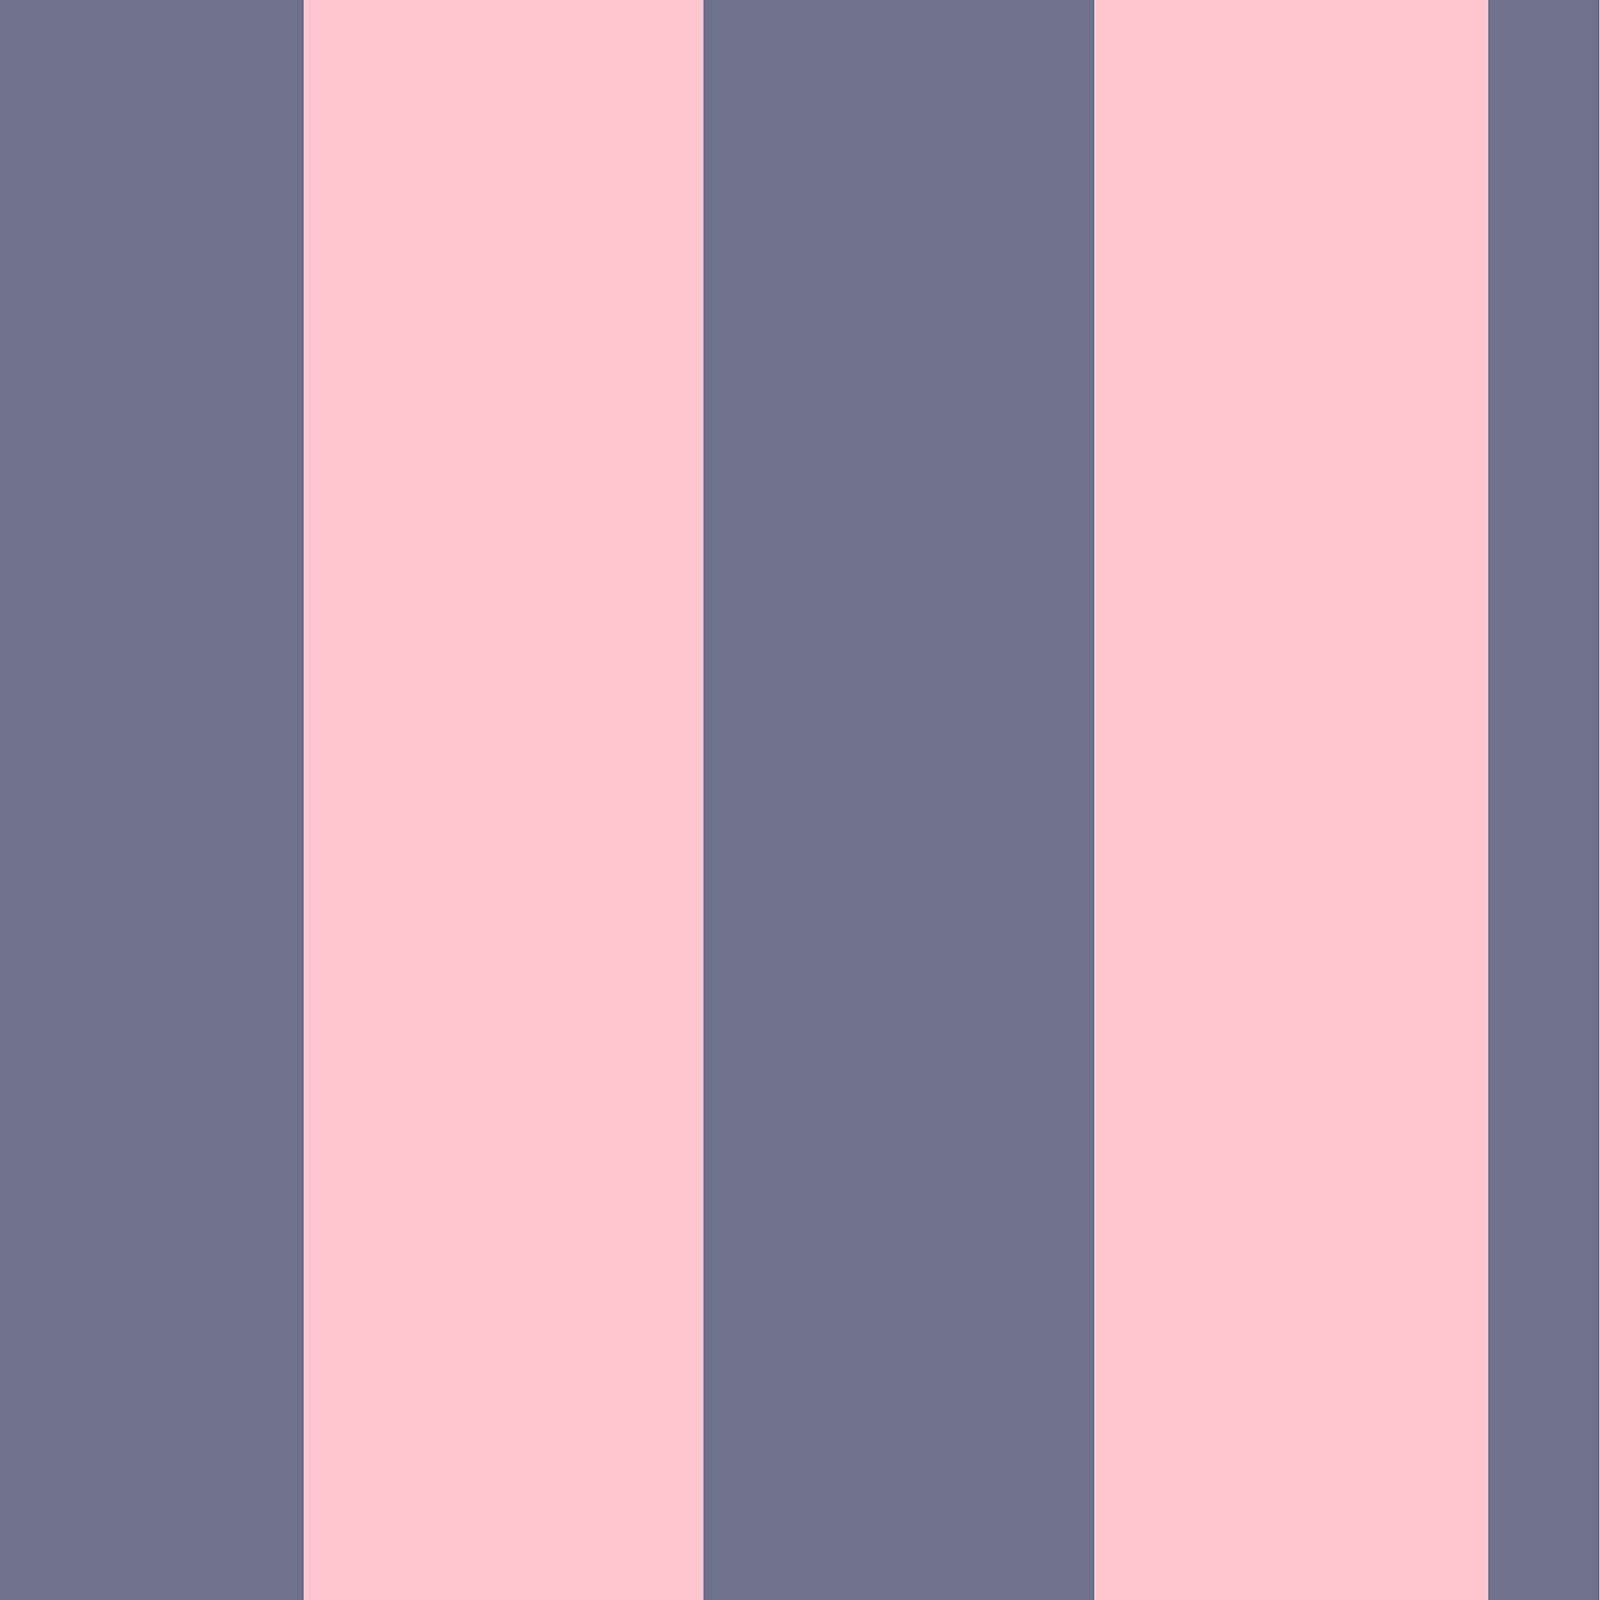 Pink And Black Stripe Wallpapers